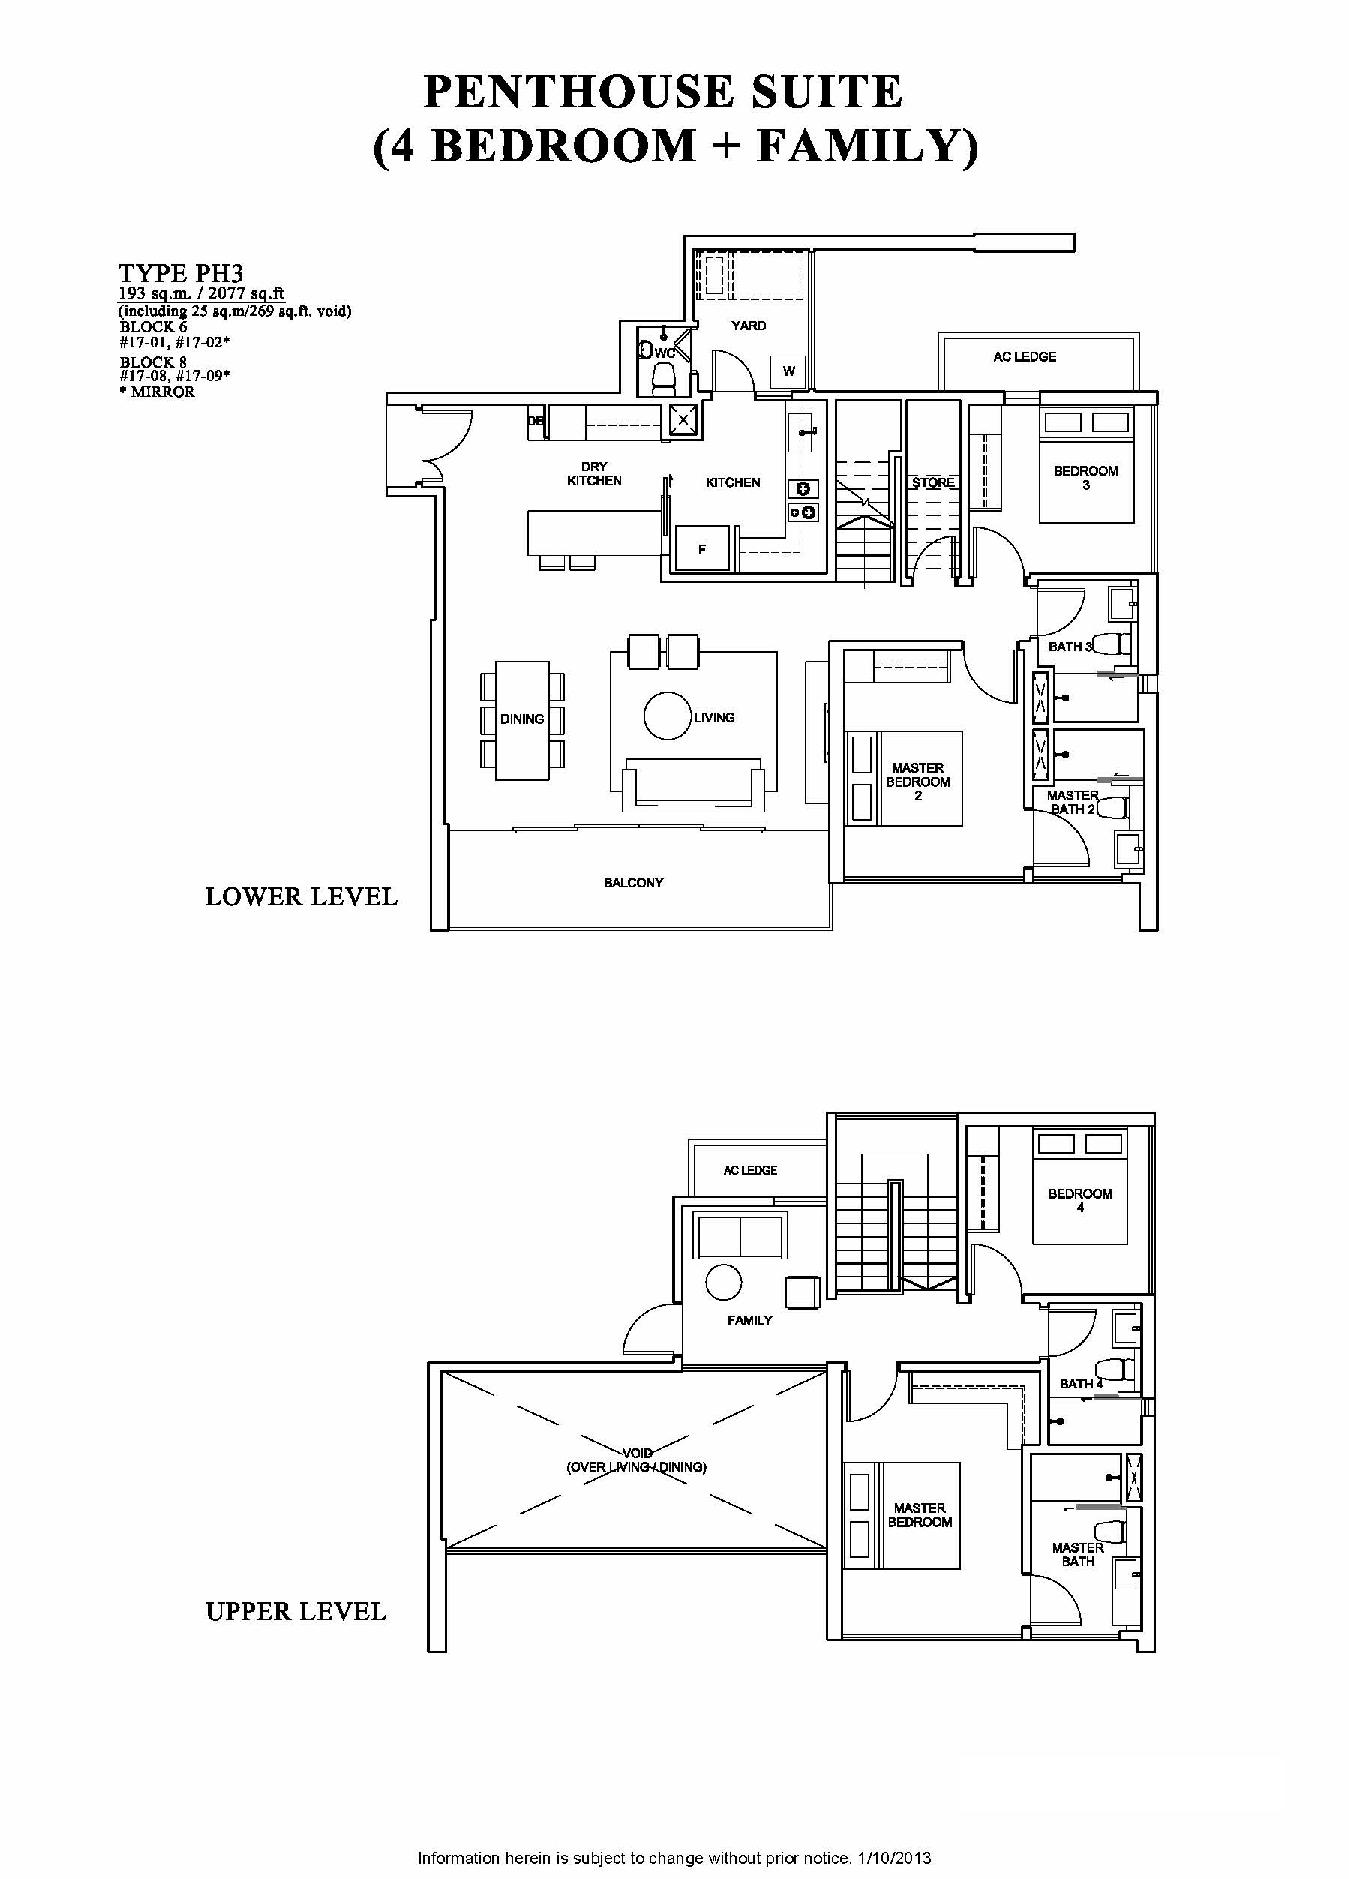 The Venue Residences 4 Bedroom + Family Penthouse Suite Floor Plan Type PH3